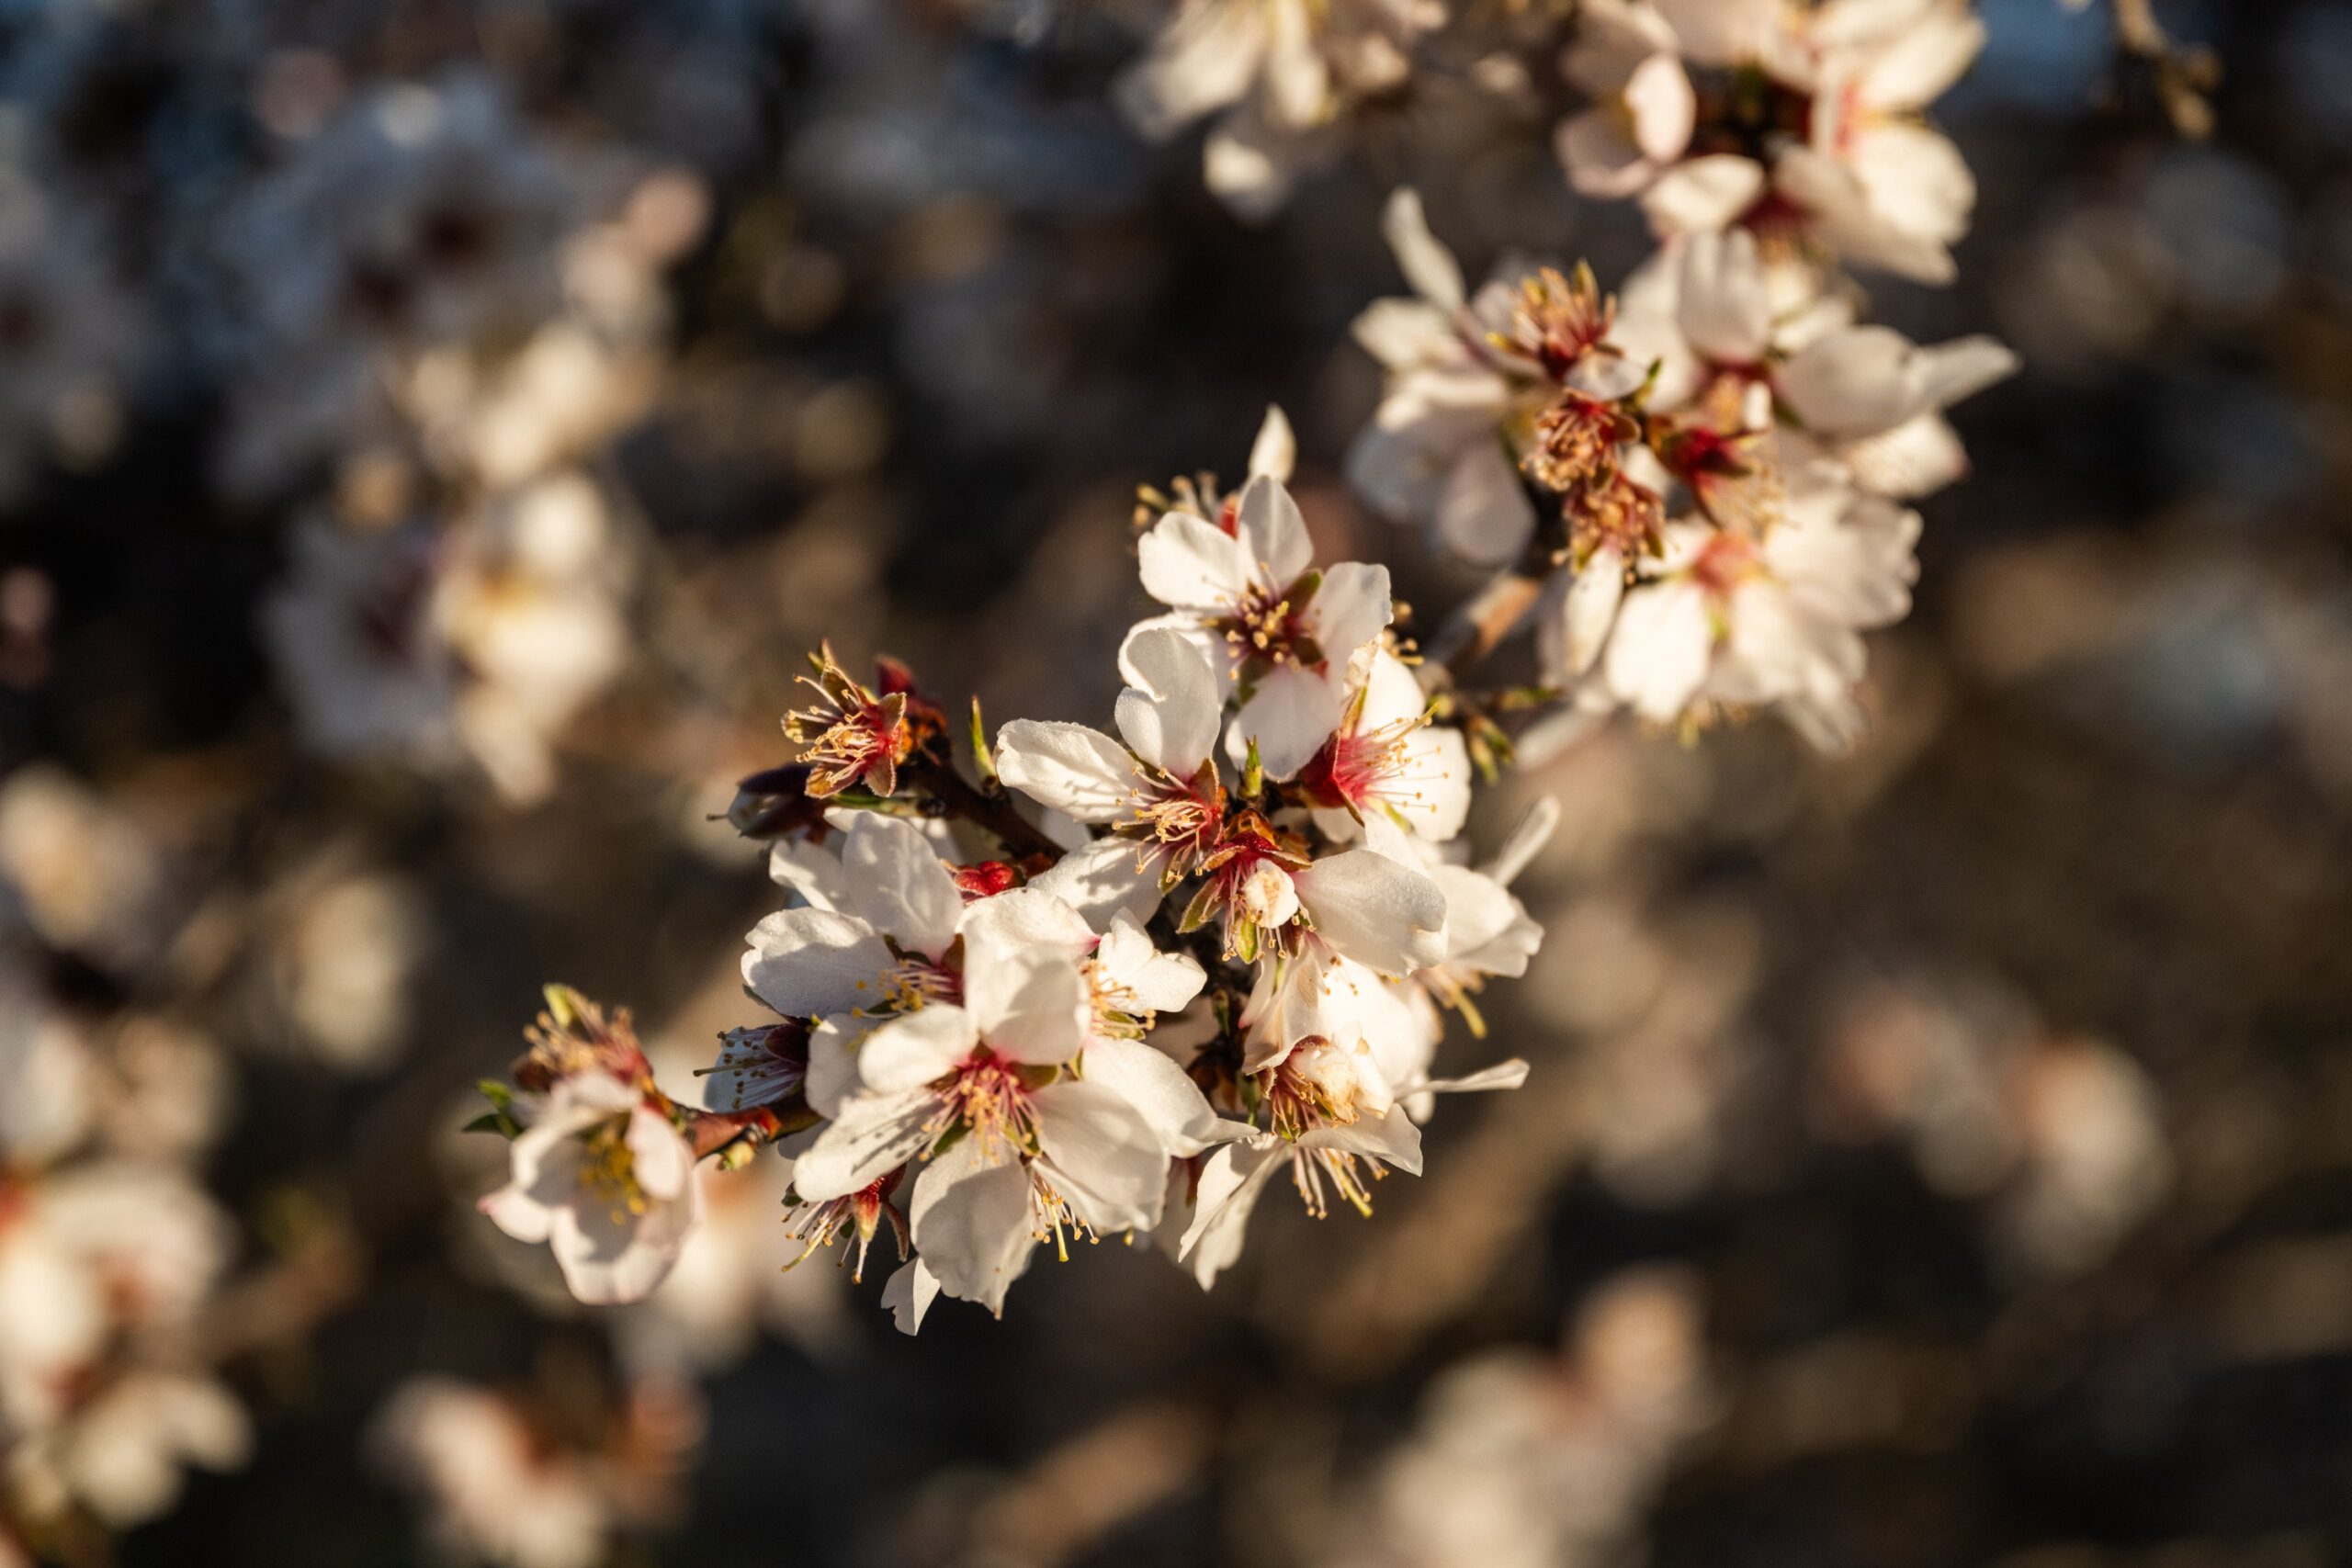 An almond tree branch in bloom along Central California's Blossom Trail